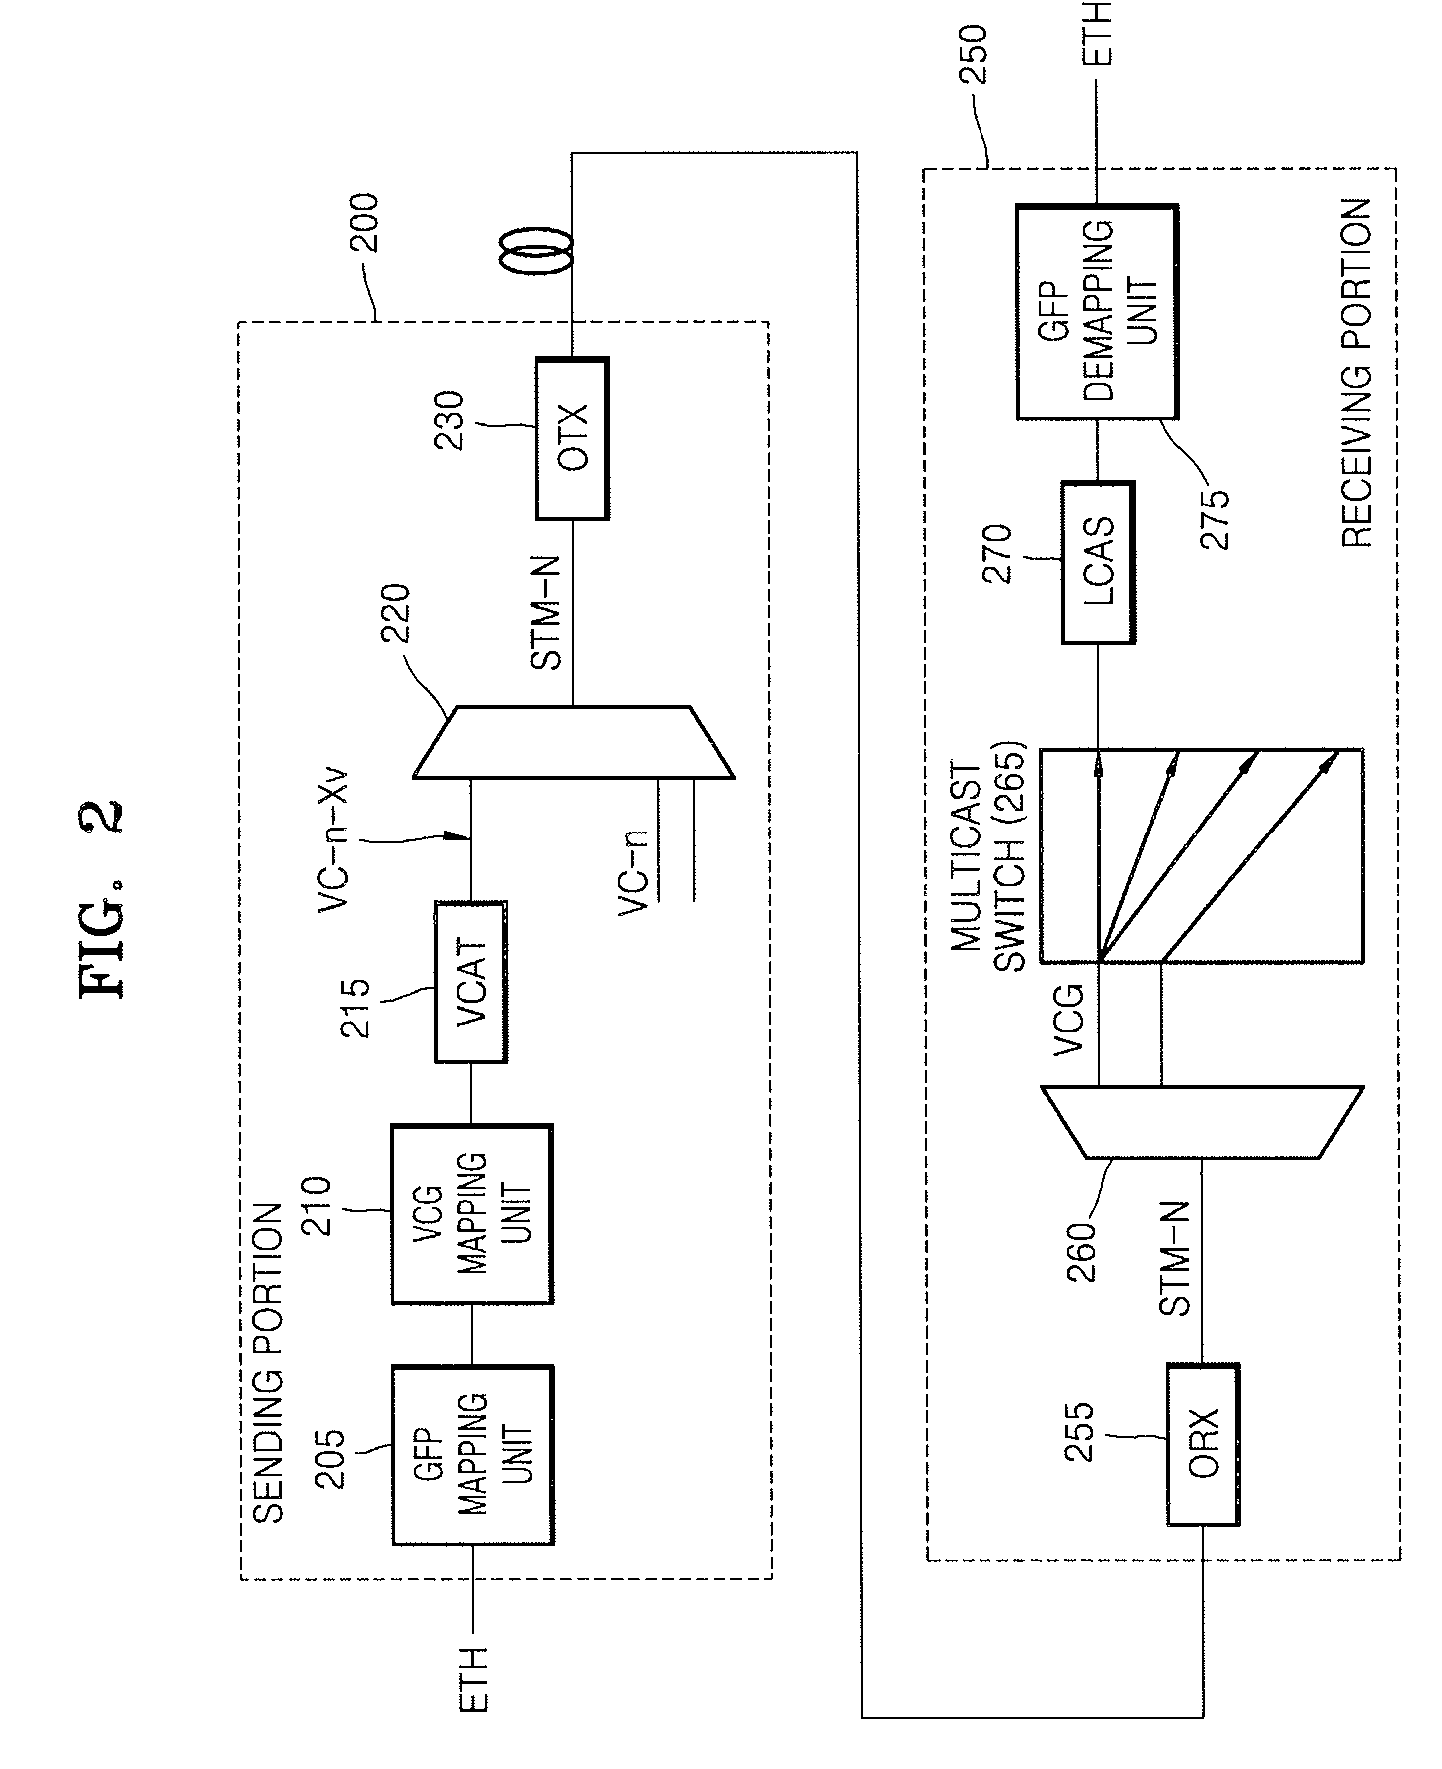 IP-TV broadcasting service system and method using physical layer's multicast switch